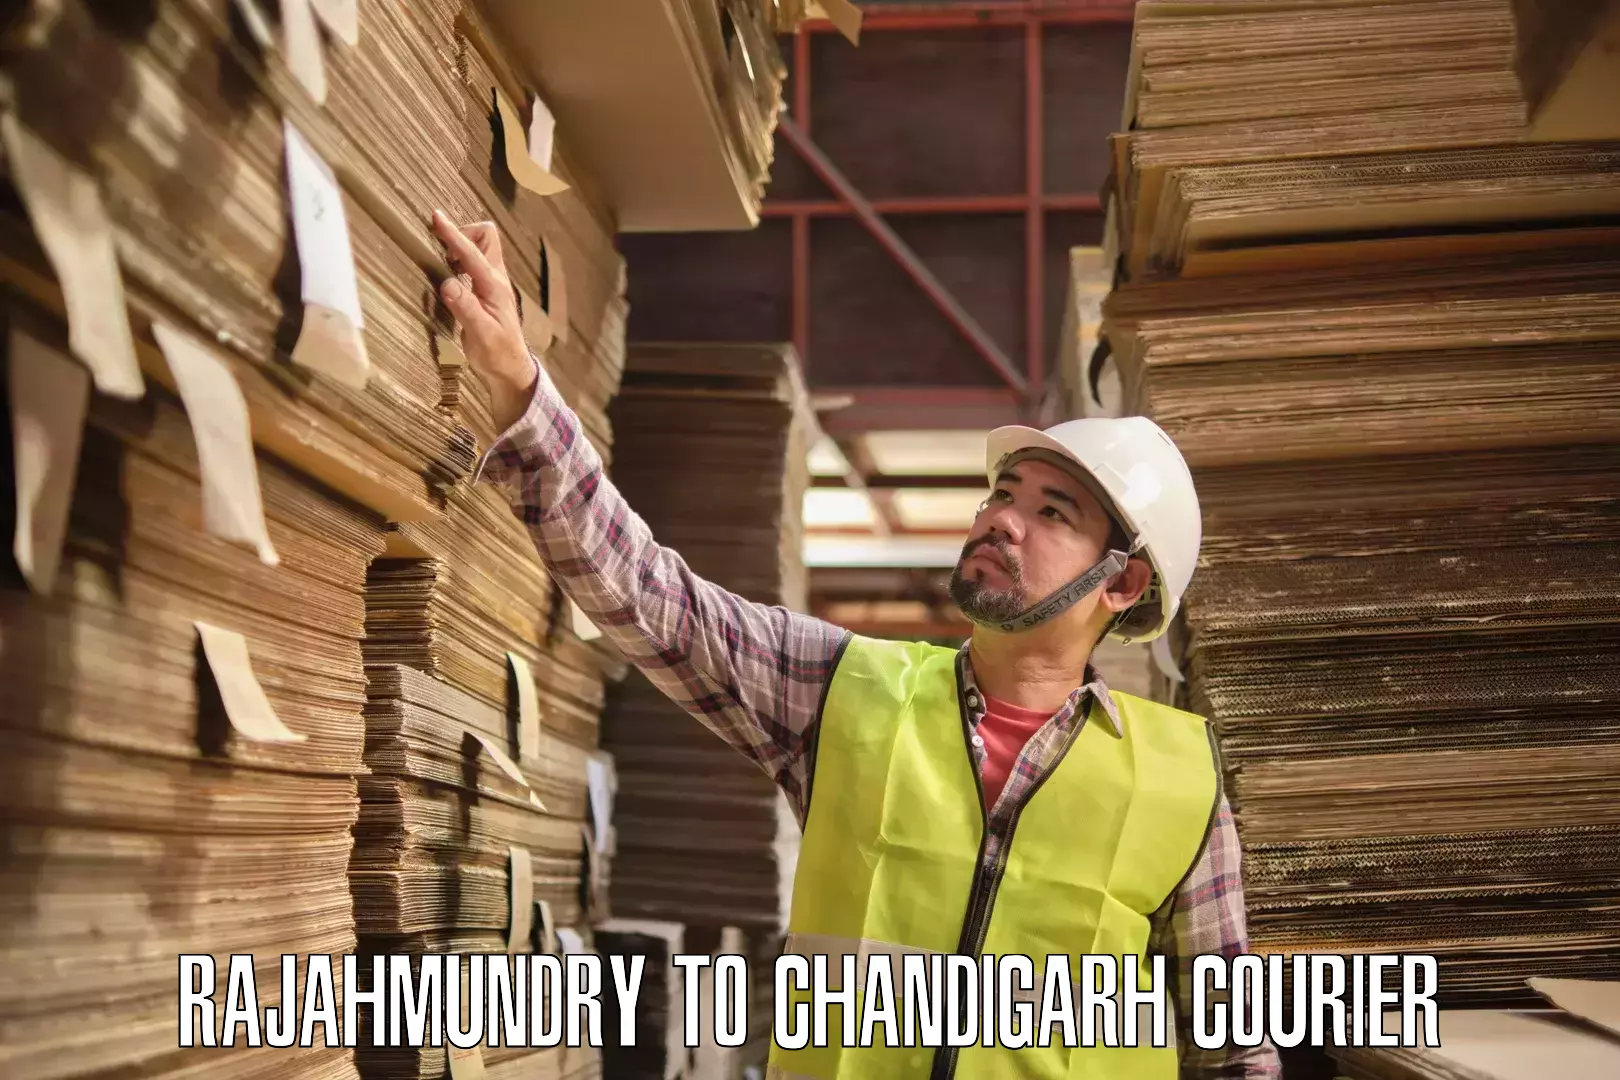 Sustainable shipping practices Rajahmundry to Chandigarh